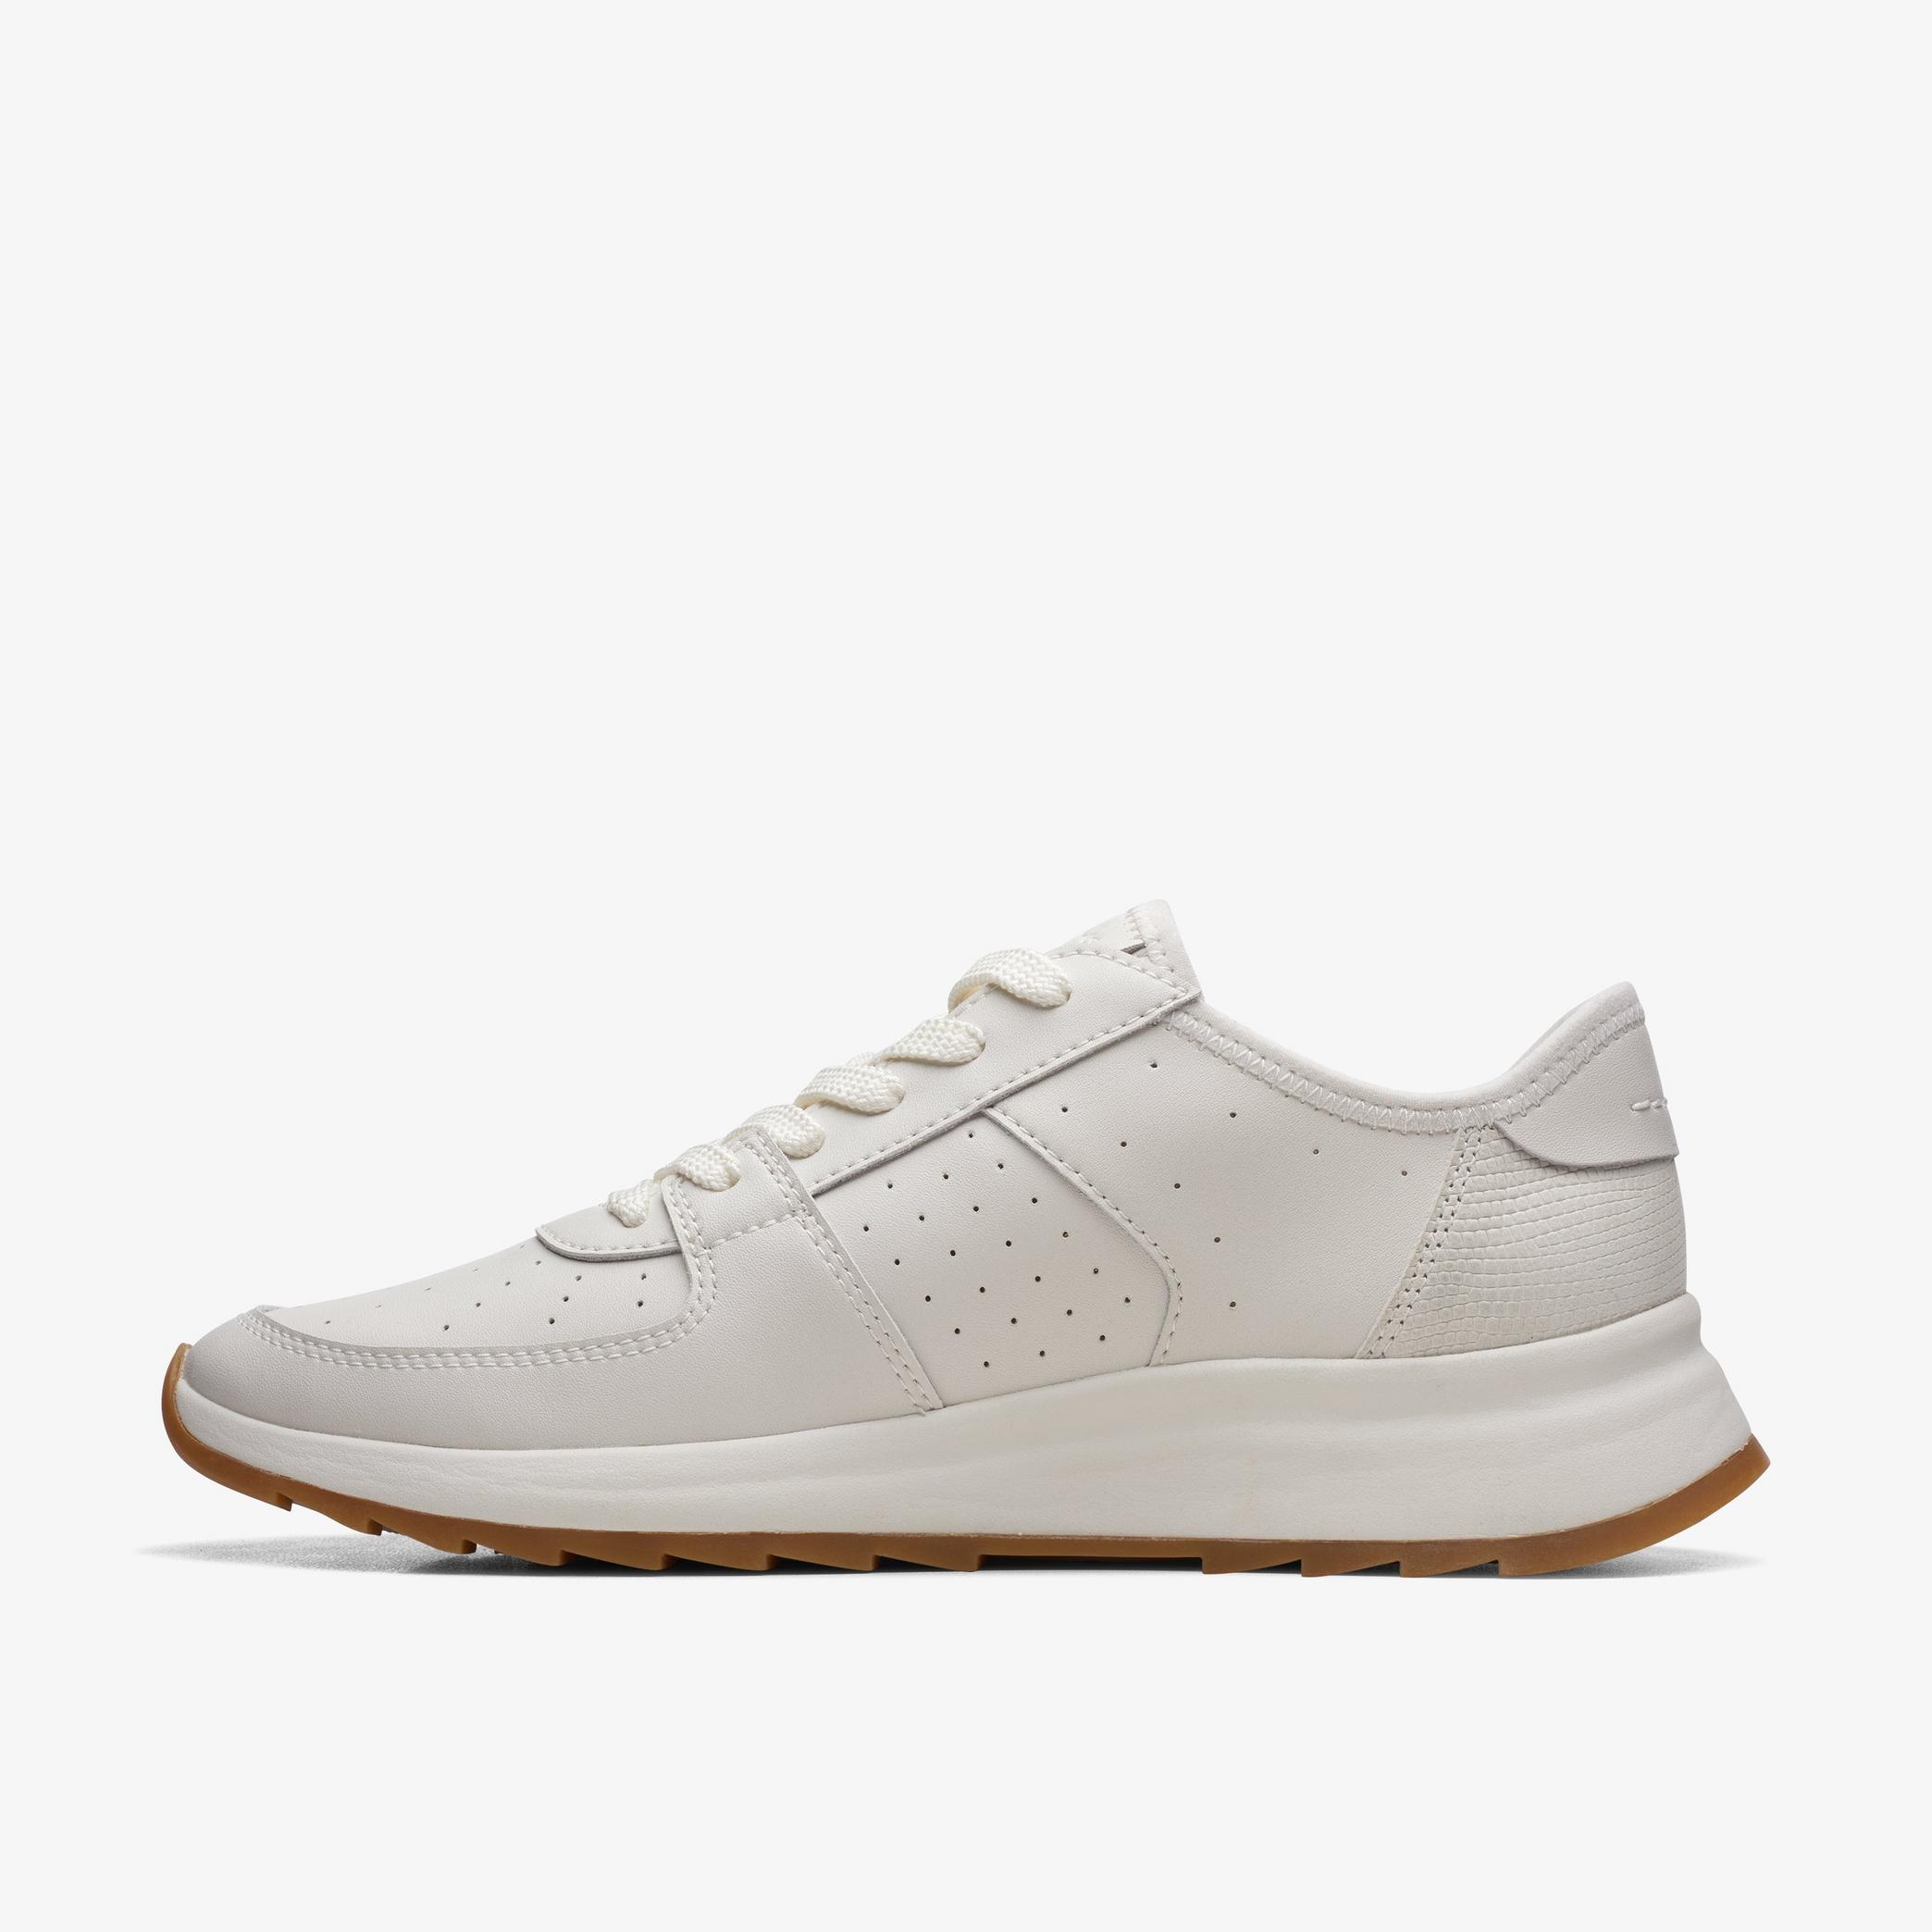 Dash Lite Run Off White Leather Trainers, view 2 of 6